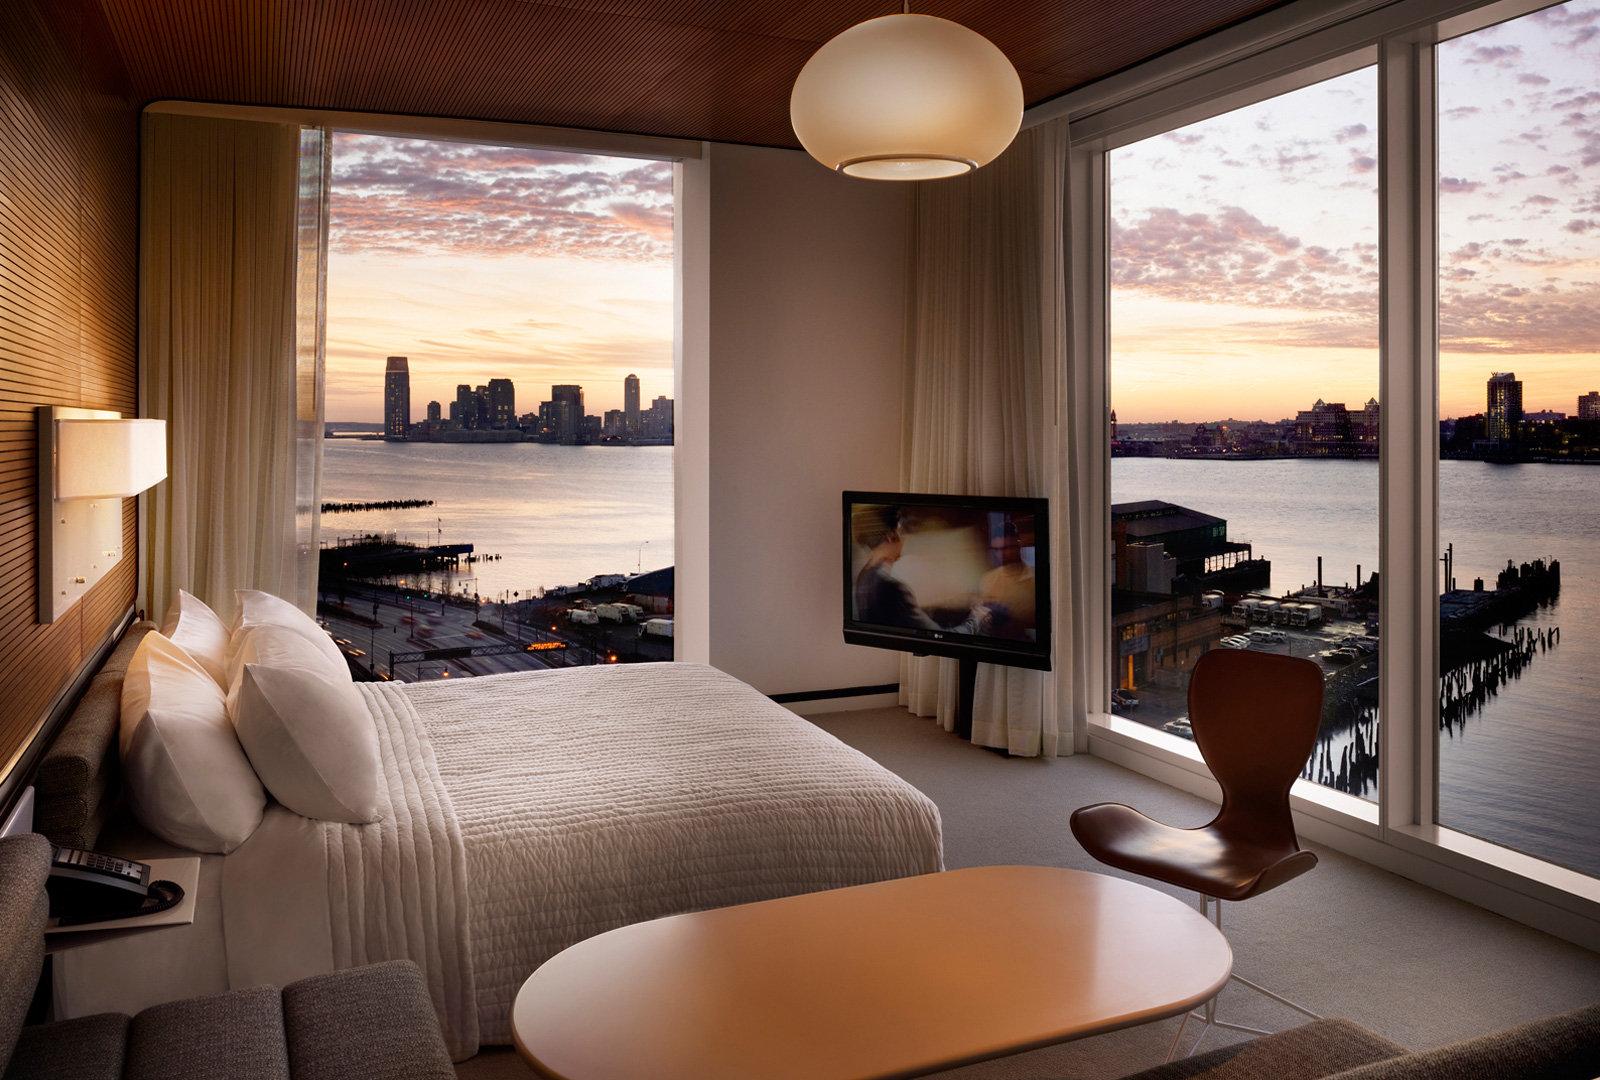 16 Best Hotels in New York. Hotels from $120/night - KAYAK